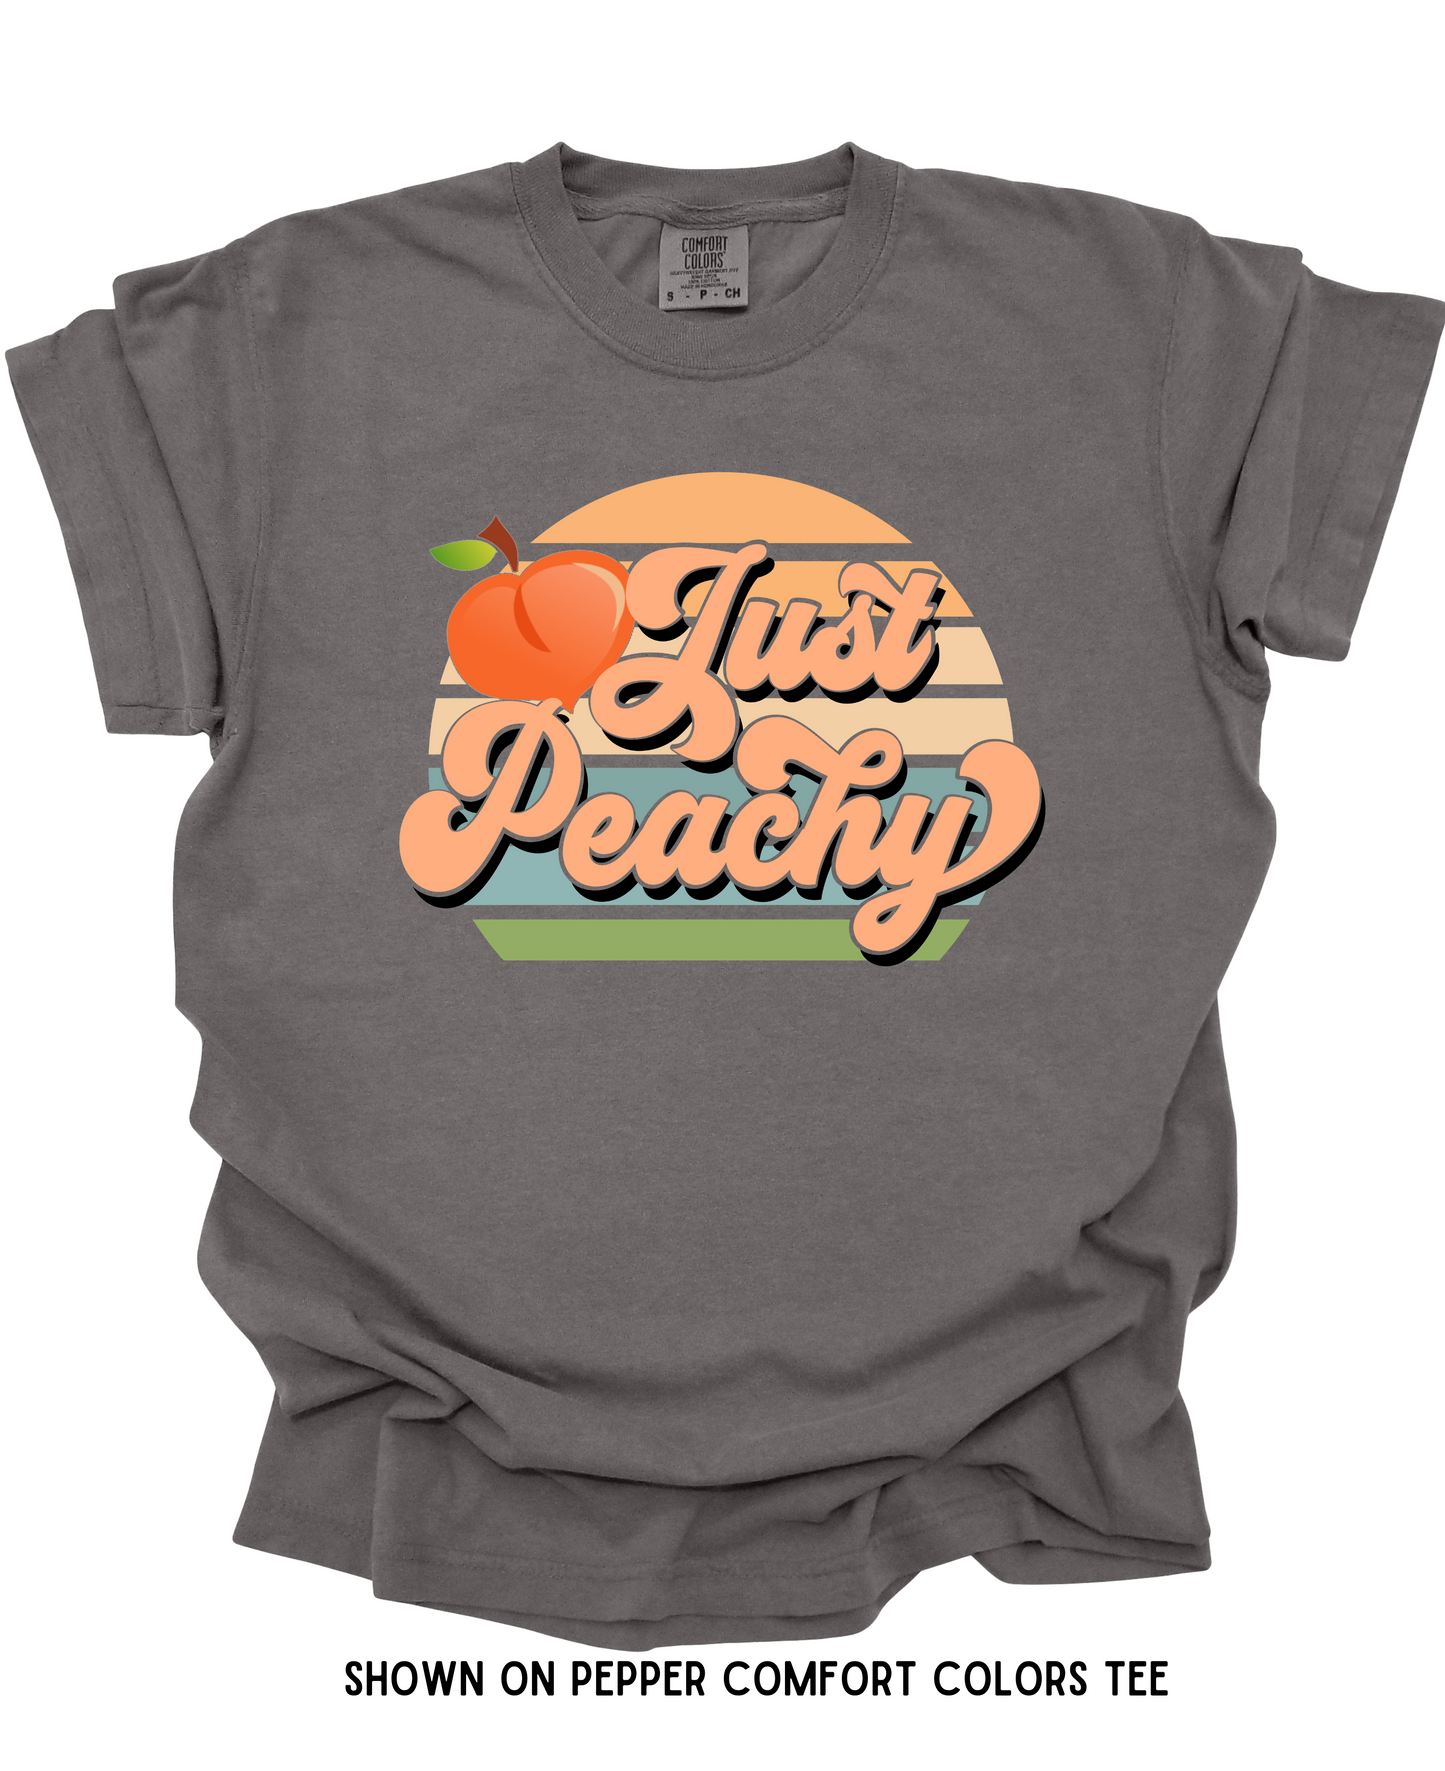 JUST PEACHY ADULT